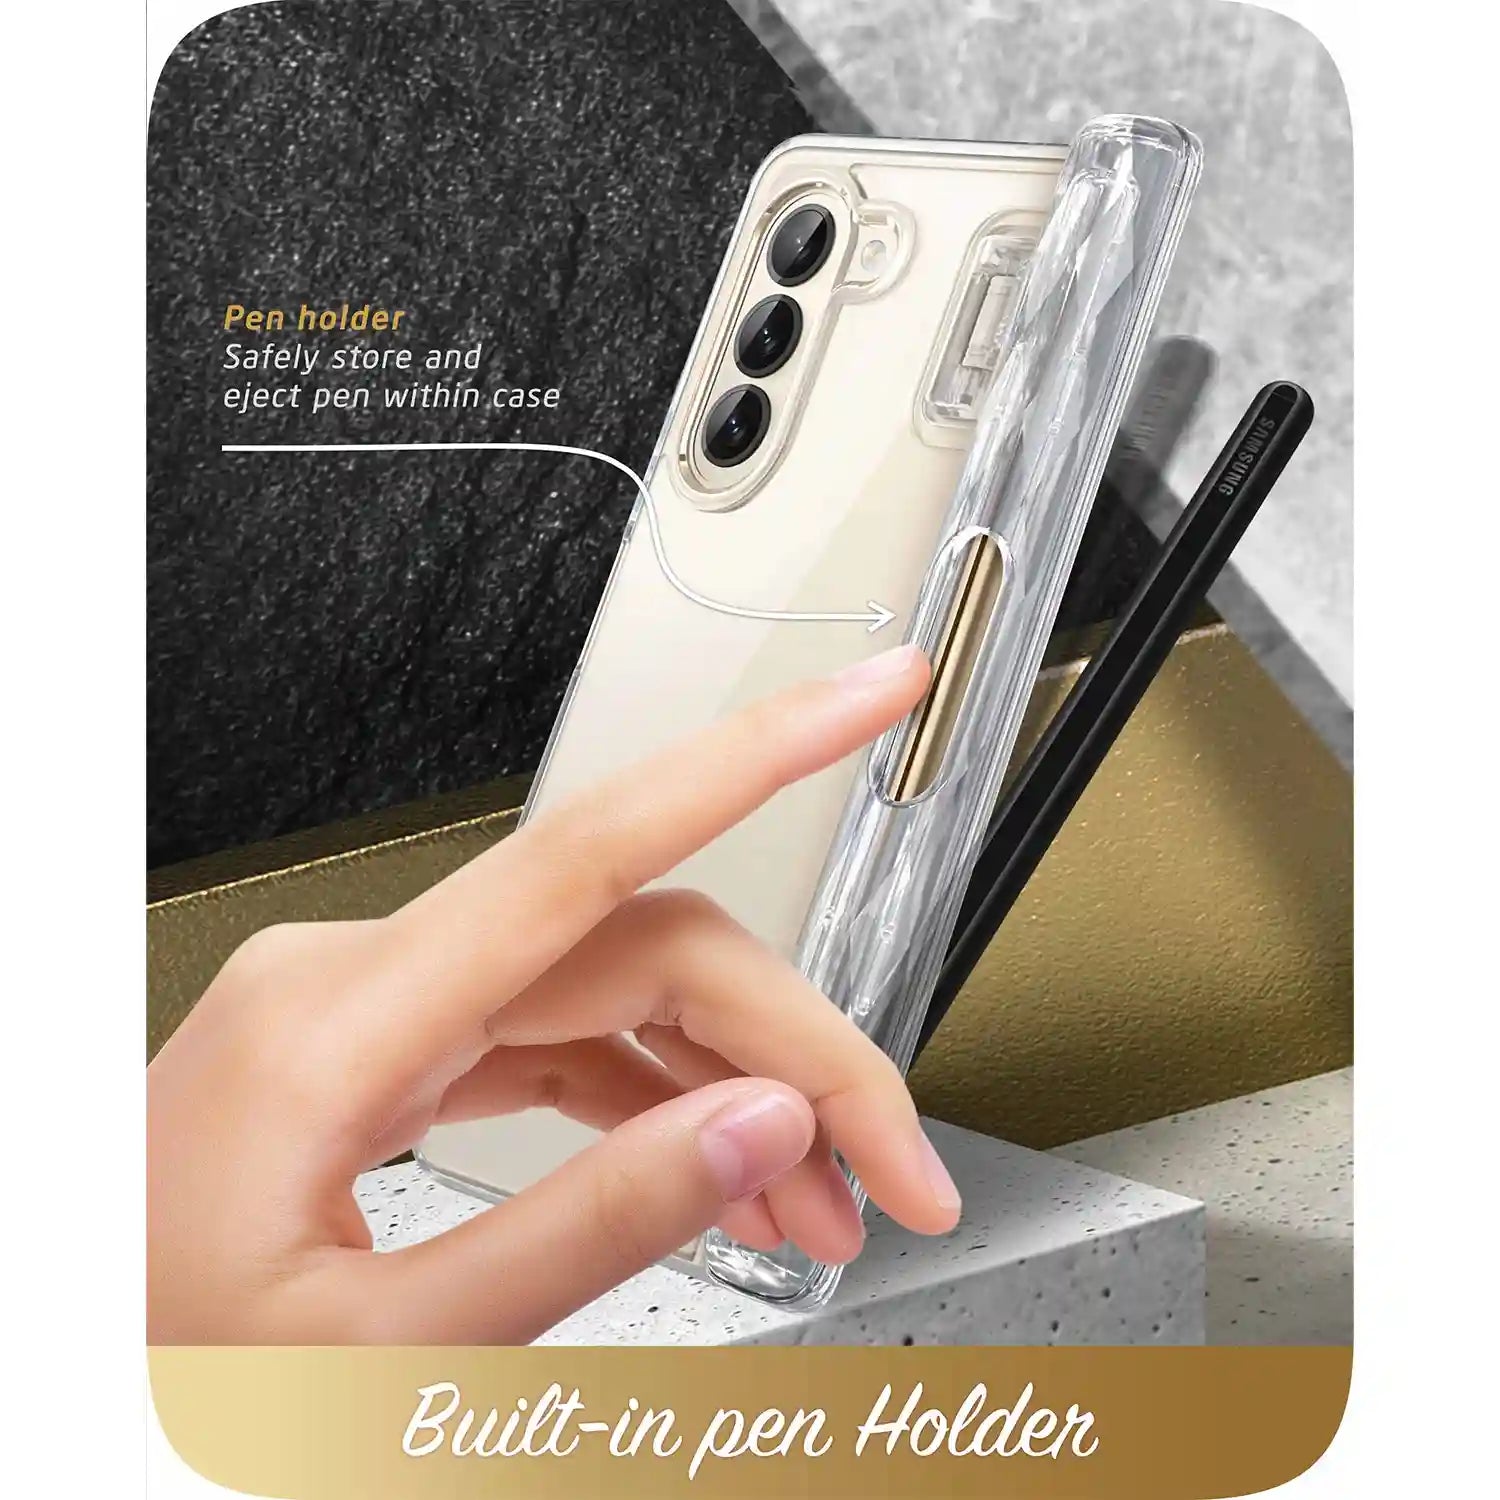 i-Blason Cosmo Case for Samsung Galaxy Z Fold 5 5G (With Build-in Screen Protector)